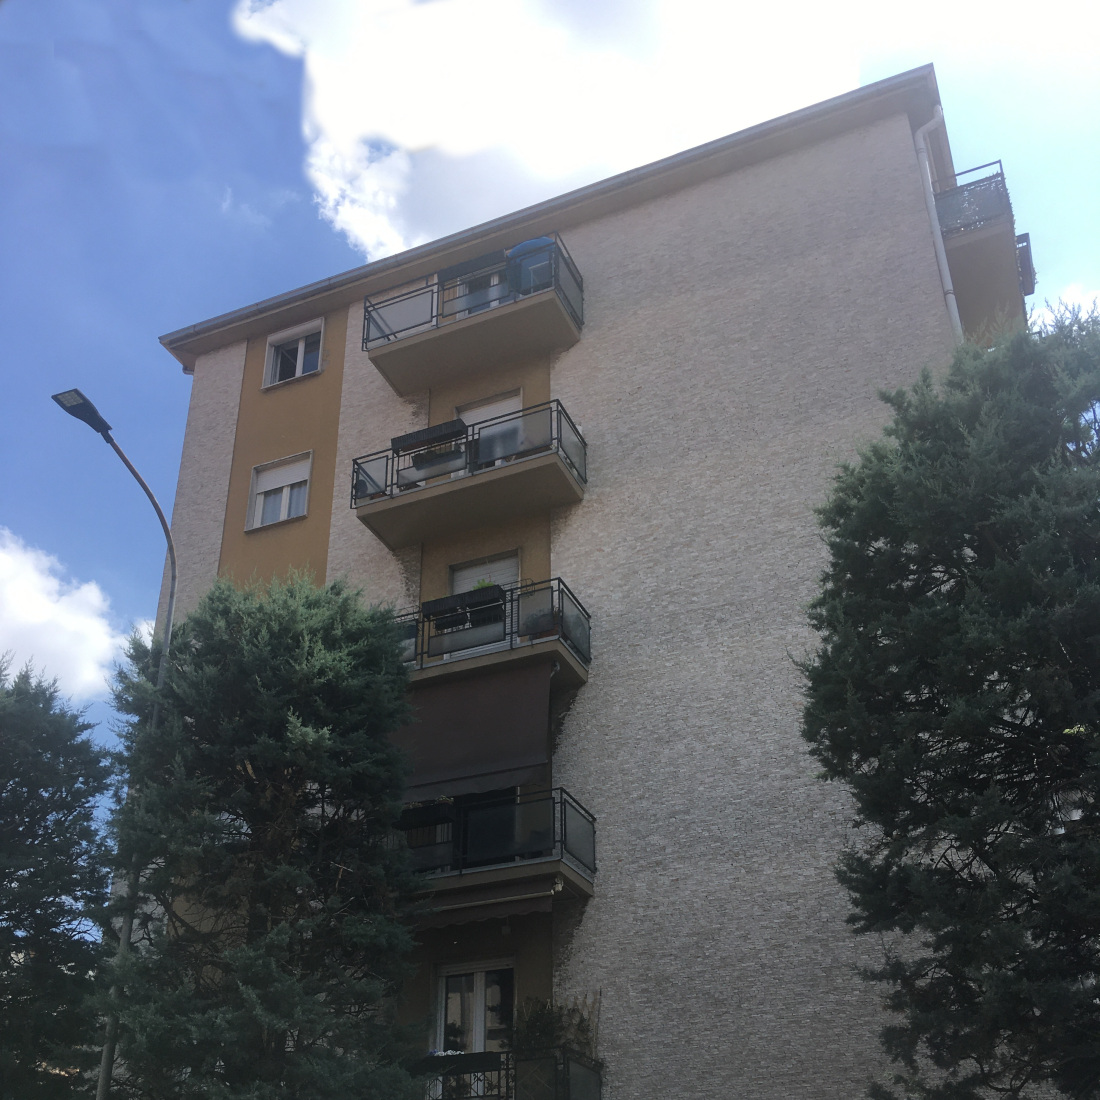 Residential ensemble (energy upgrading), 37 Bossi street, Saronno - View of the current situation